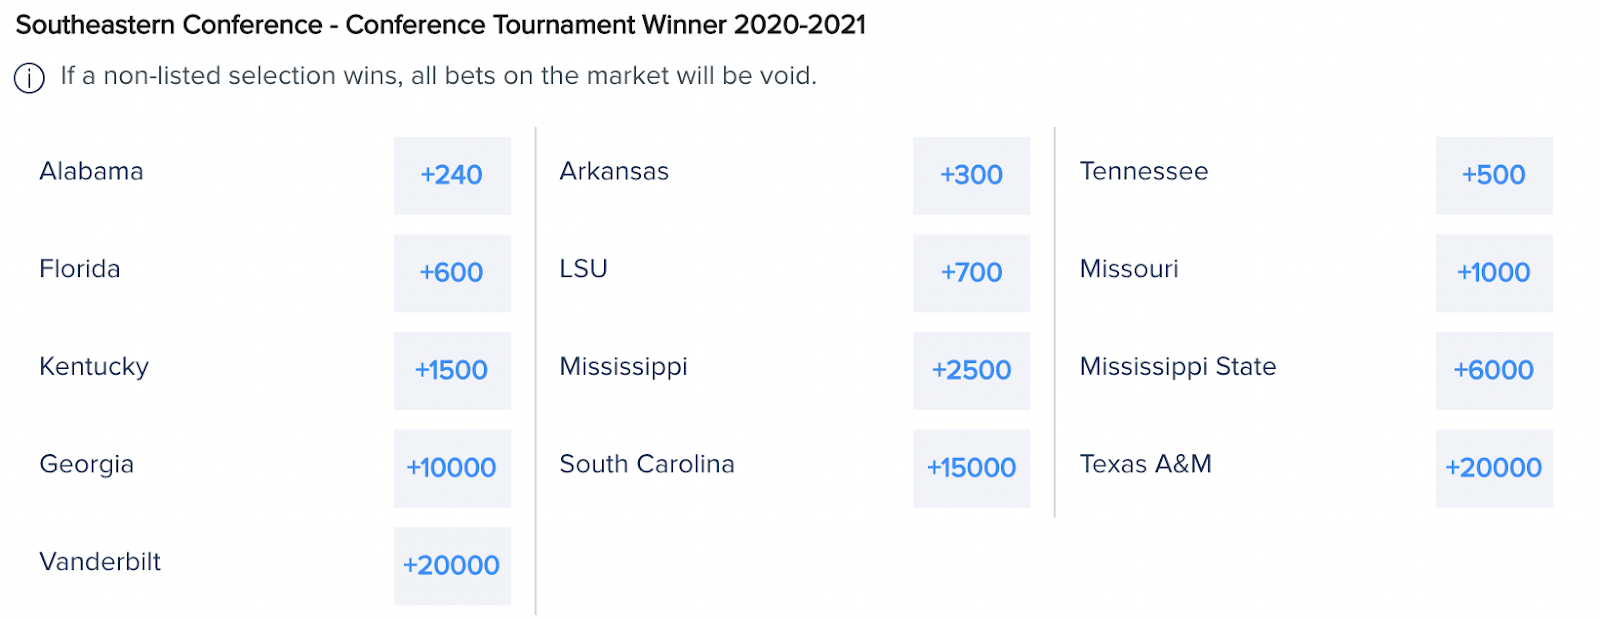 Southeastern Conference (SEC): SEC Conference Tournament Winner 2020-2021 - Odds from FanDuel